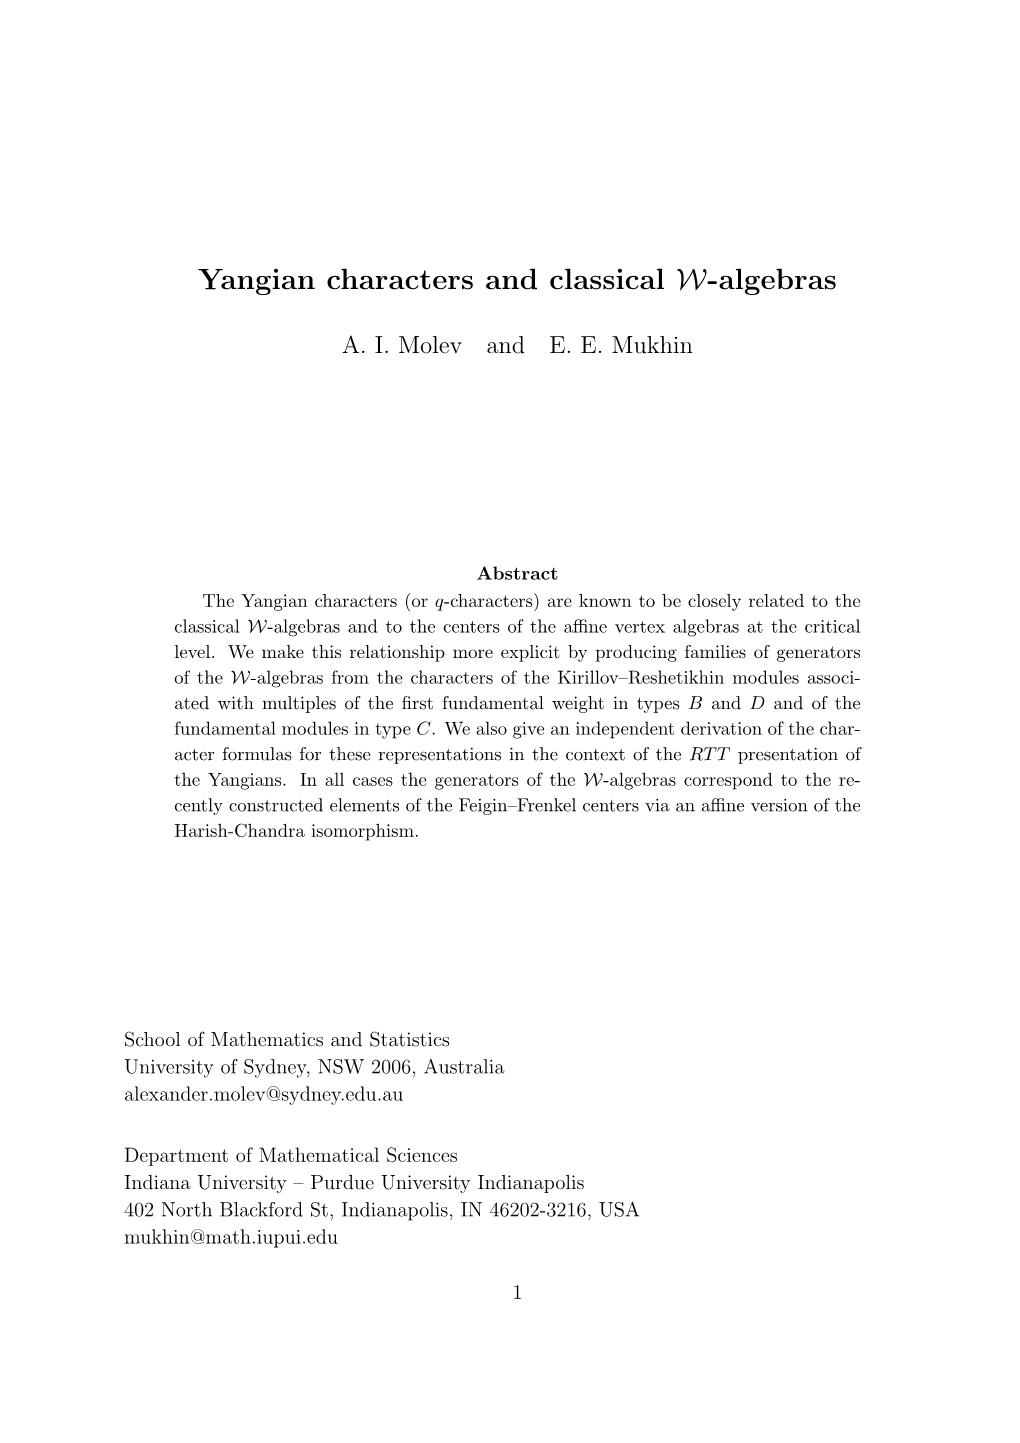 Yangian Characters and Classical W-Algebras